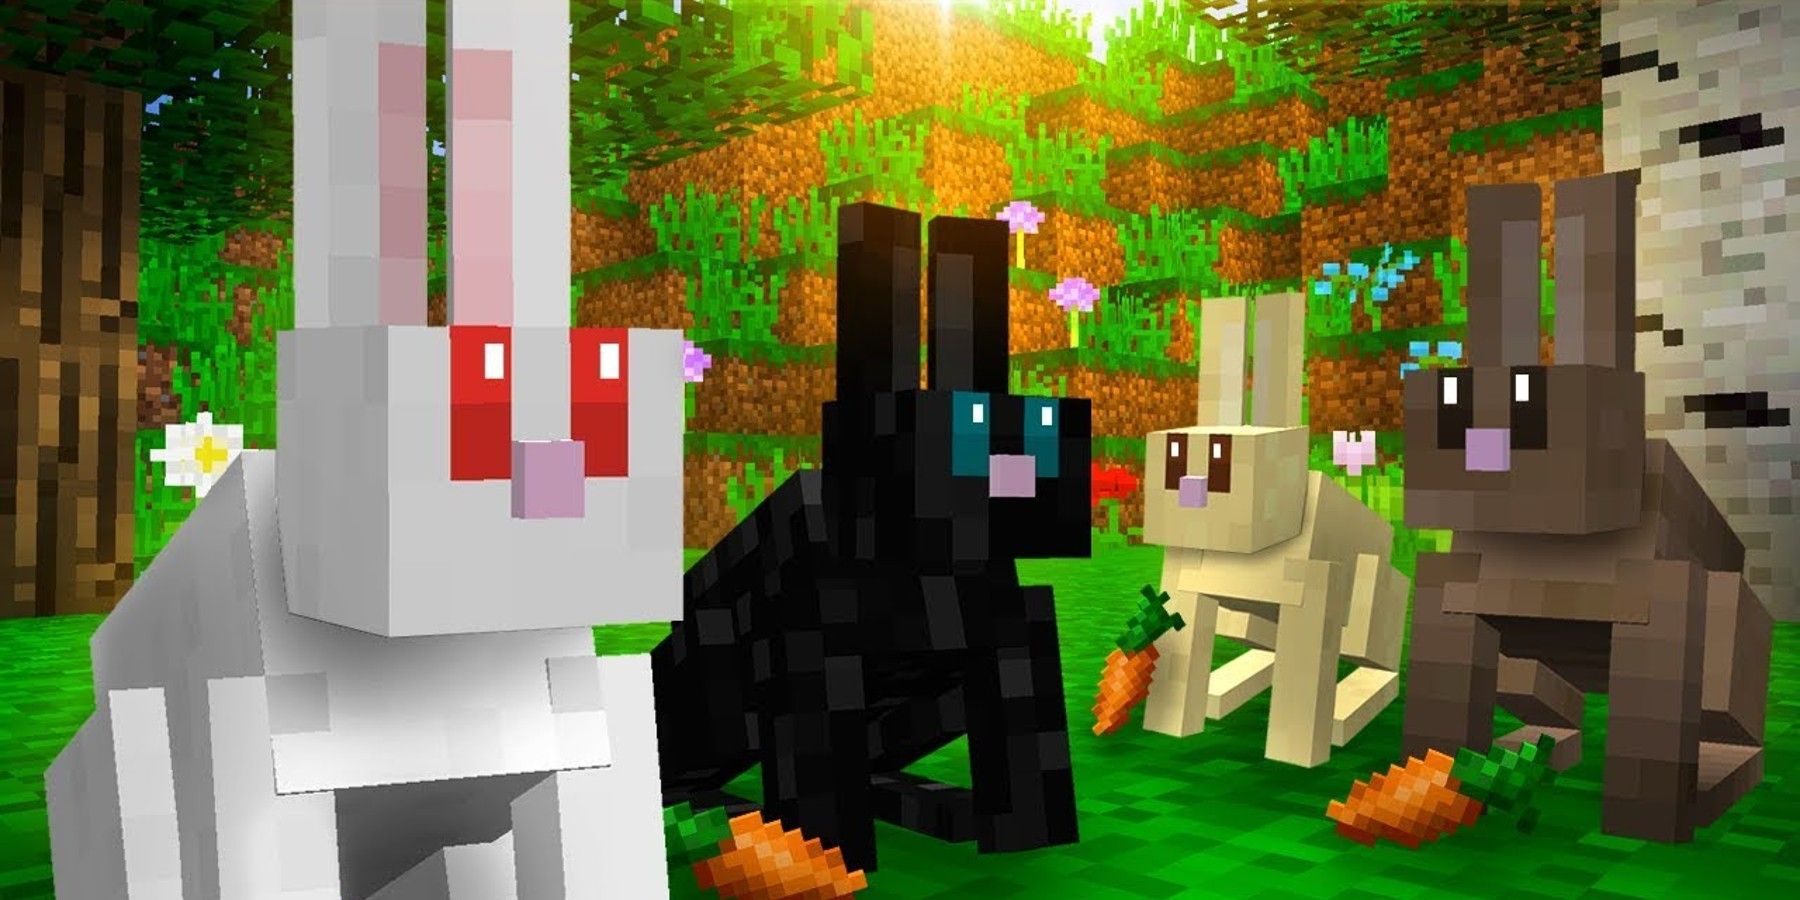 Unlucky-Minecraft-Player-Has-Corral-Full-of-Bunnies-Killed-By-Lightning-Strike-6